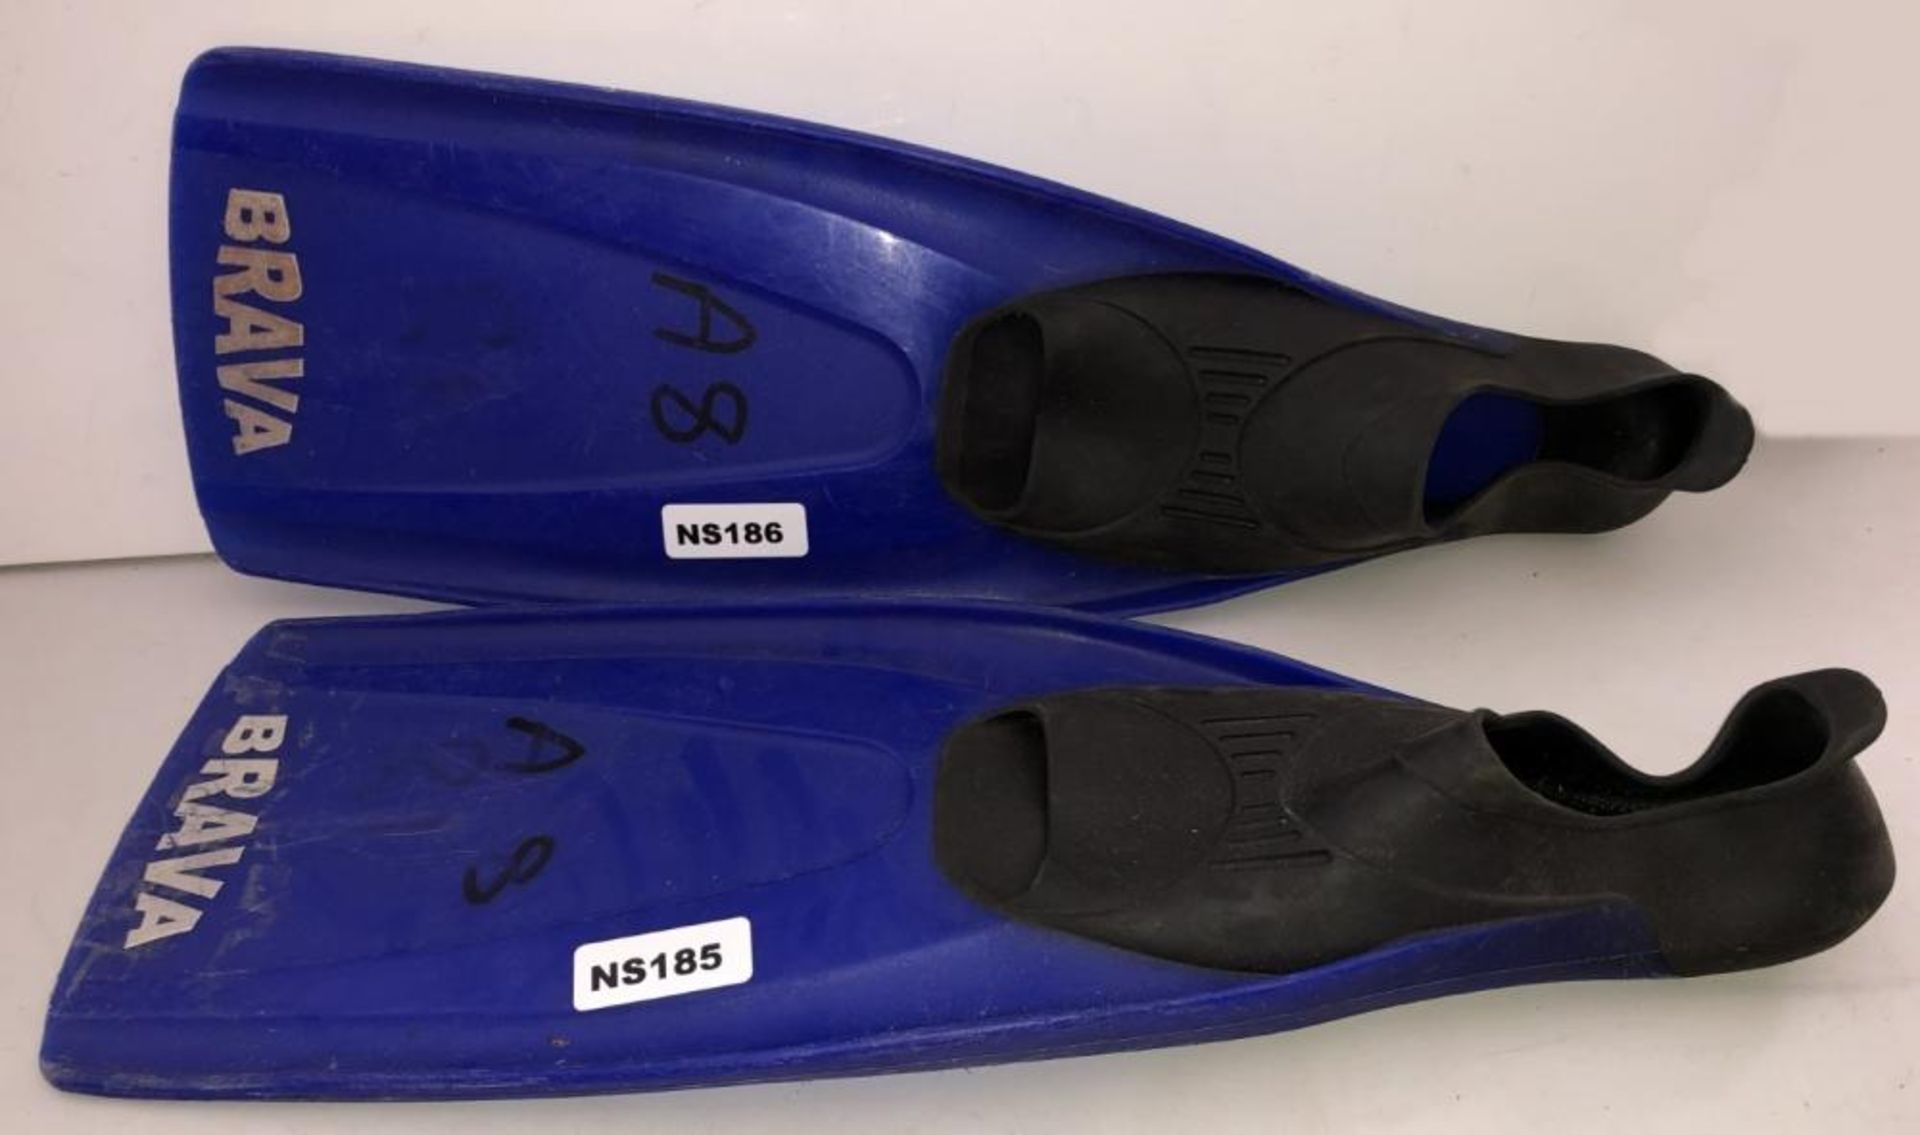 5 x Pairs Of Branded Diving Fins - Ref: NS175, NS176, NS177, NS178, NS179, NS180, NS181, NS182, NS18 - Image 4 of 17